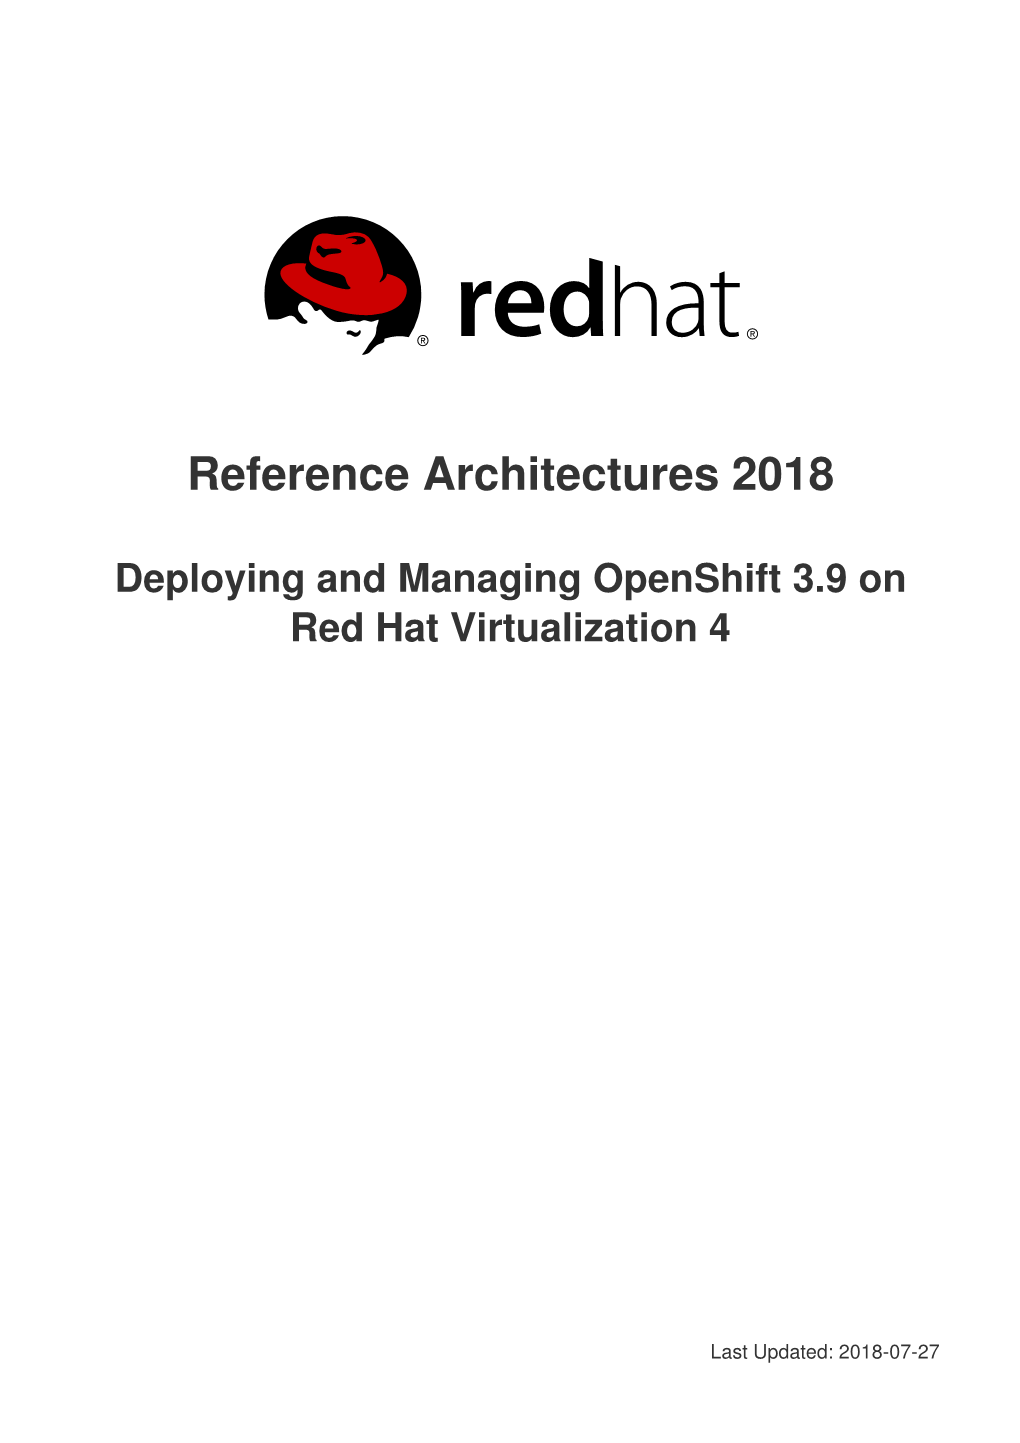 Reference Architectures 2018 Deploying and Managing Openshift 3.9 on Red Hat Virtualization 4